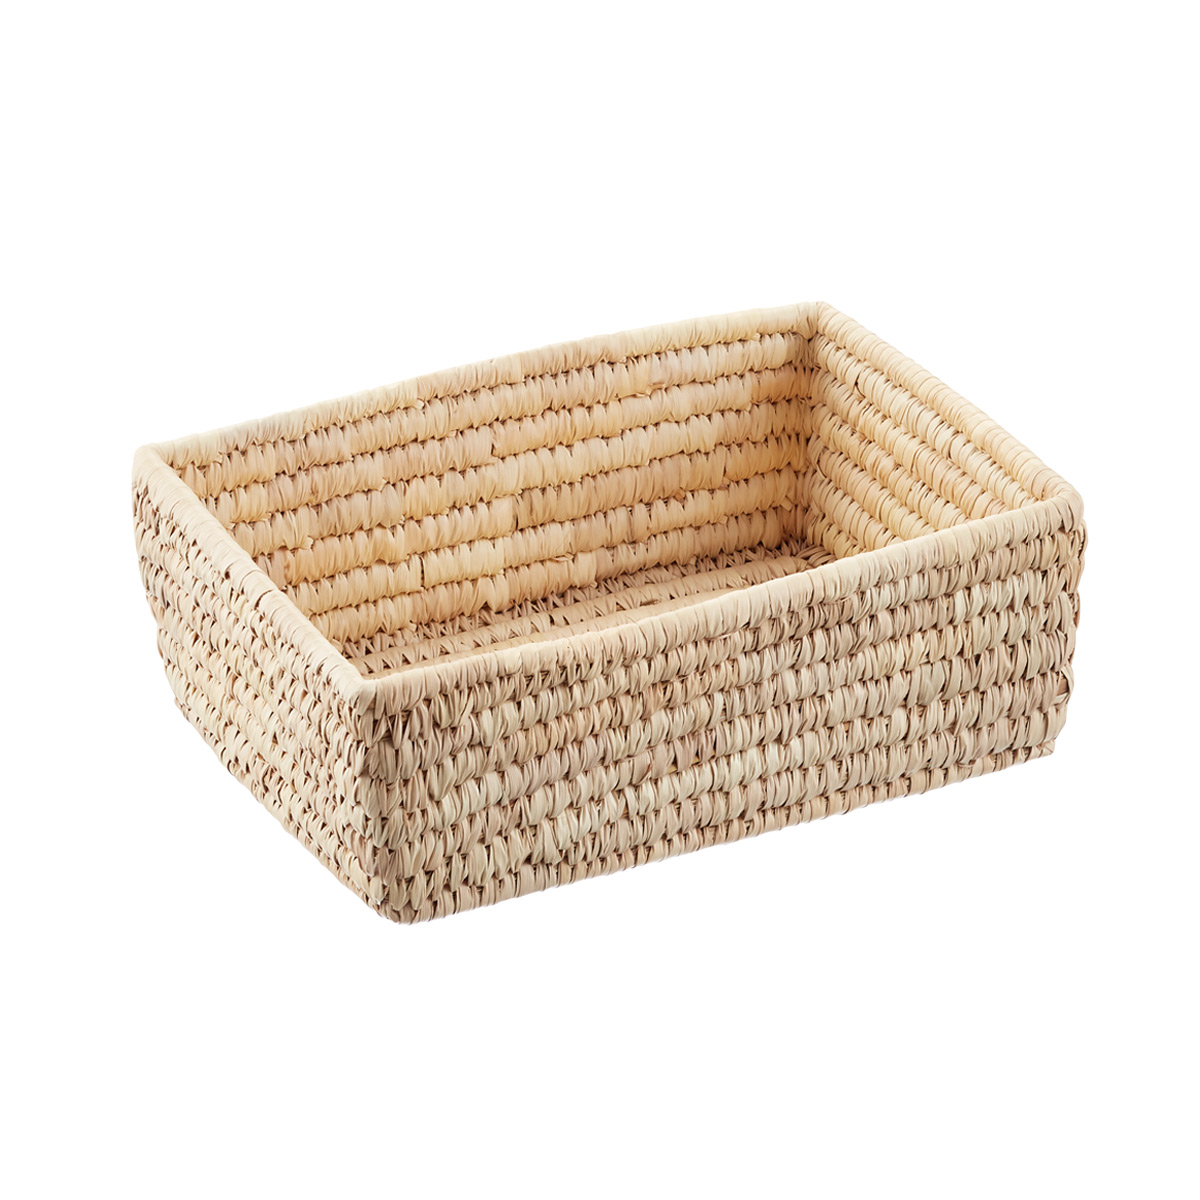 Hand-Woven Palm Leaf Baskets | The Container Store